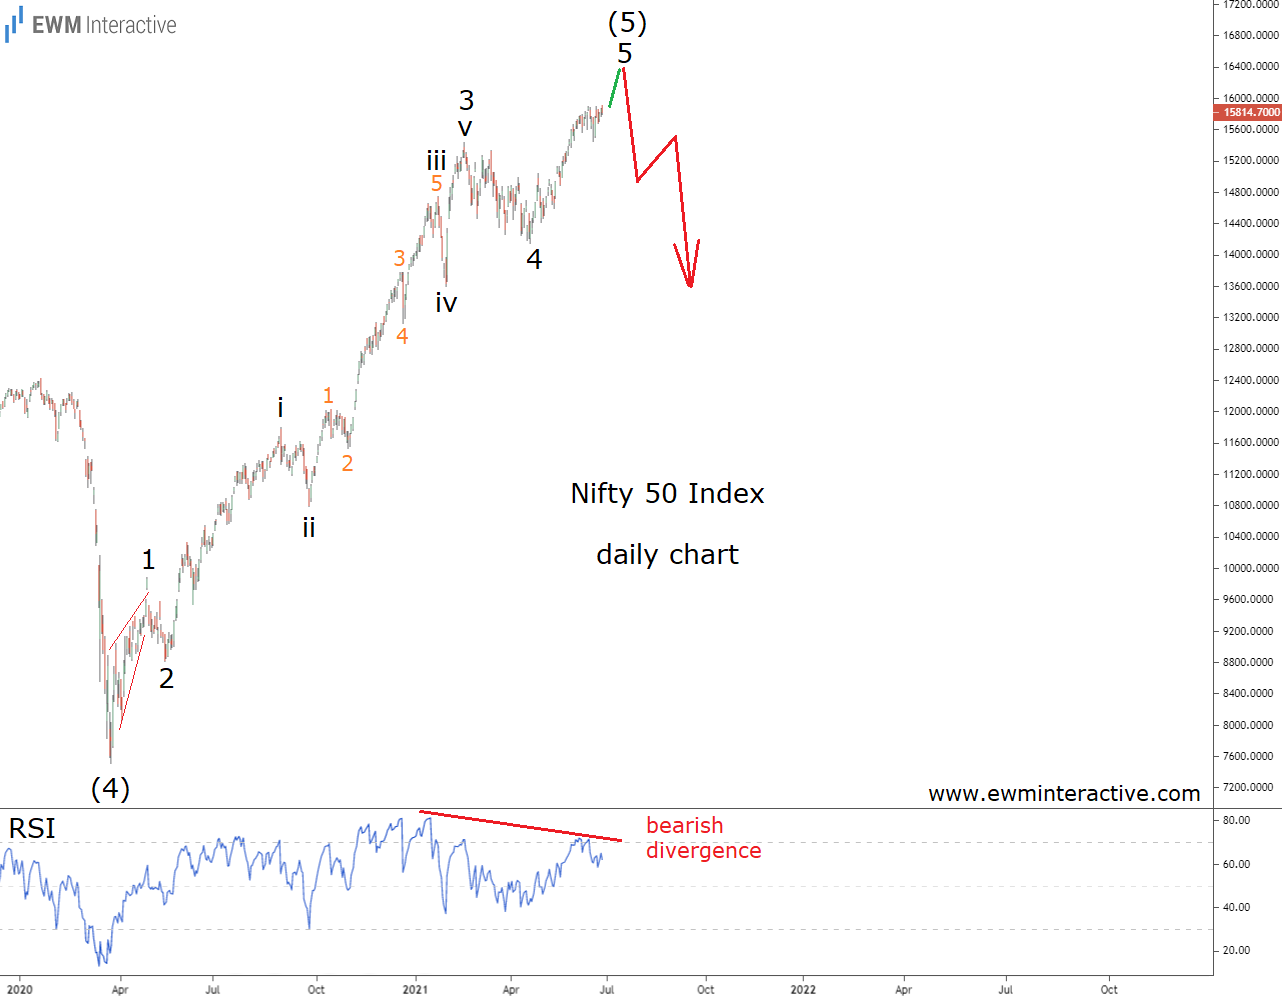 Nifty 50 Index Daily Chart